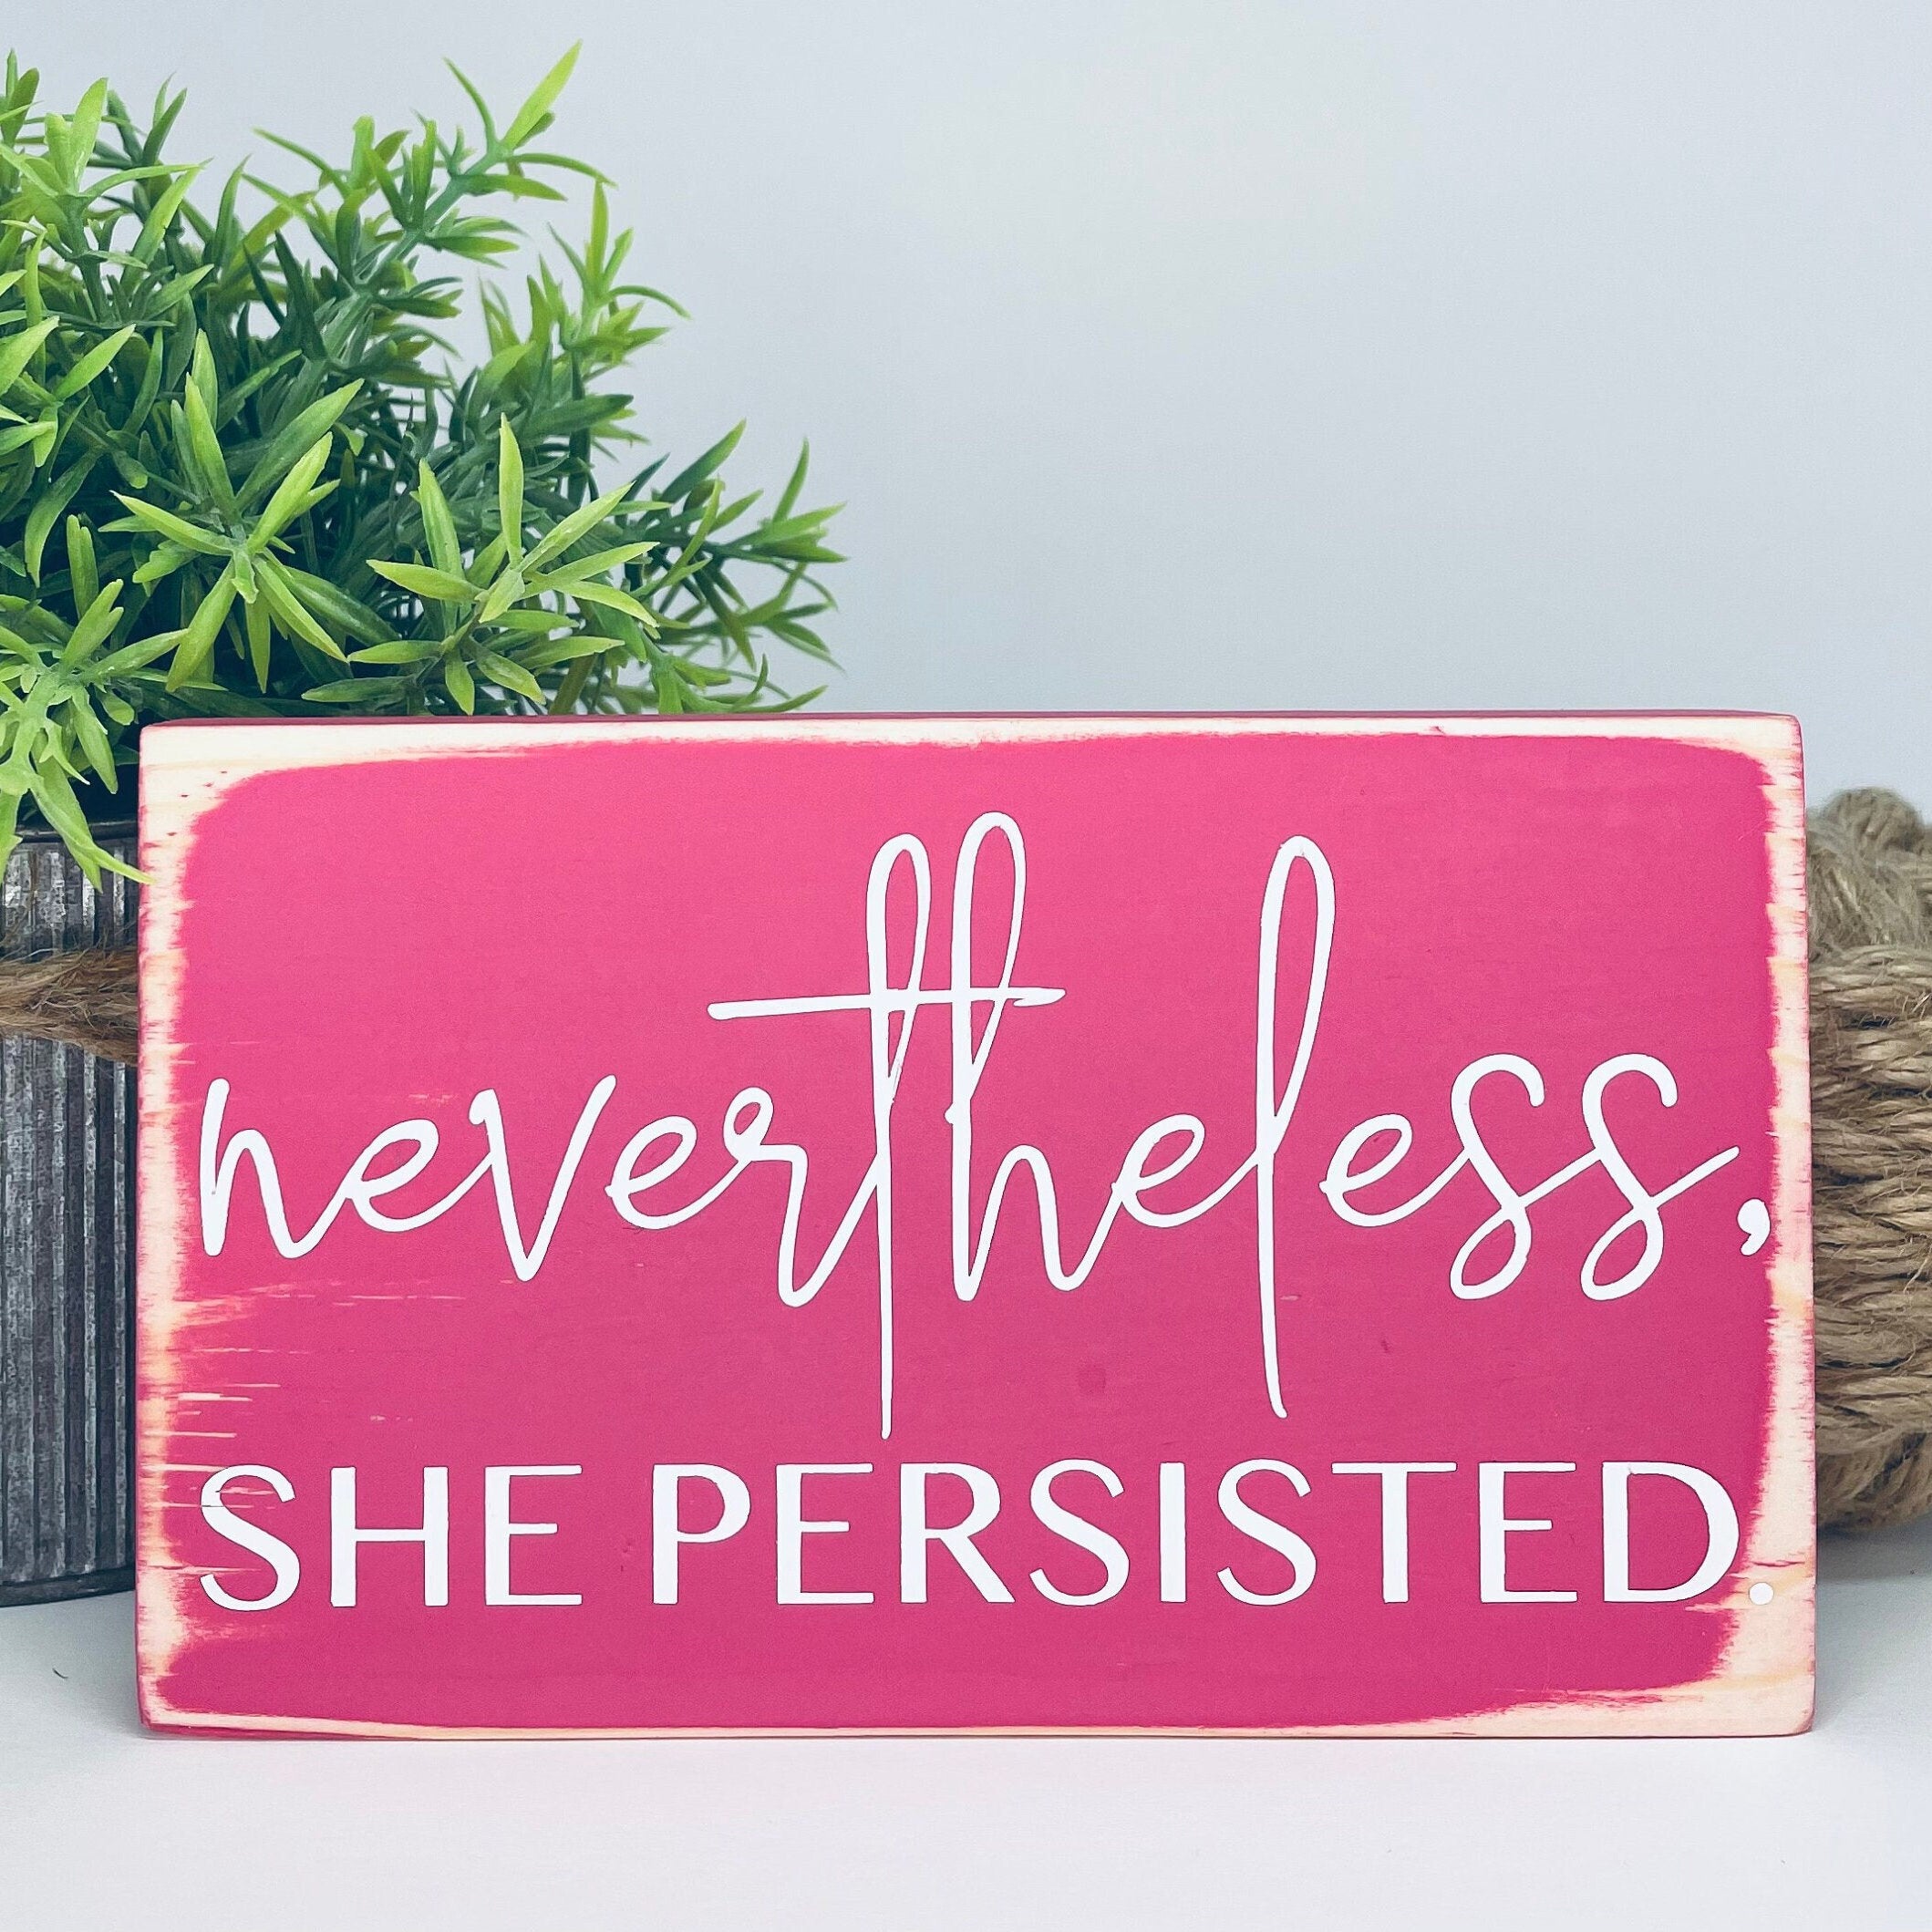 small rectangular wood sign painted hot pink with white lettering that reads "Nevertheless, she persisted." Nevertheless is in script. She persisted is below it in all caps.